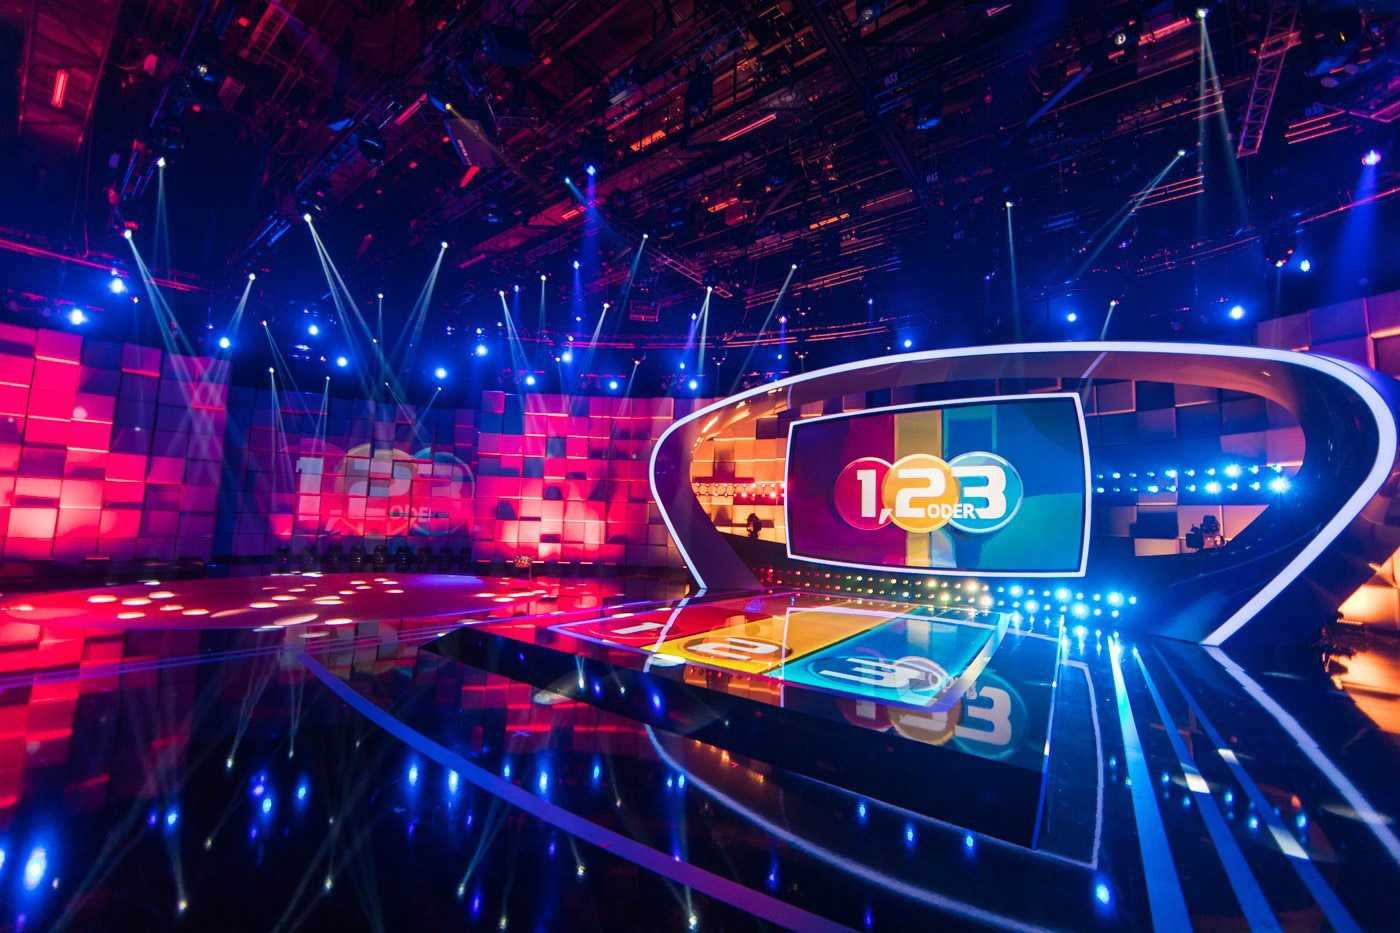 The 1000th edition of 1, 2 oder 3 was broadcast on ZDF